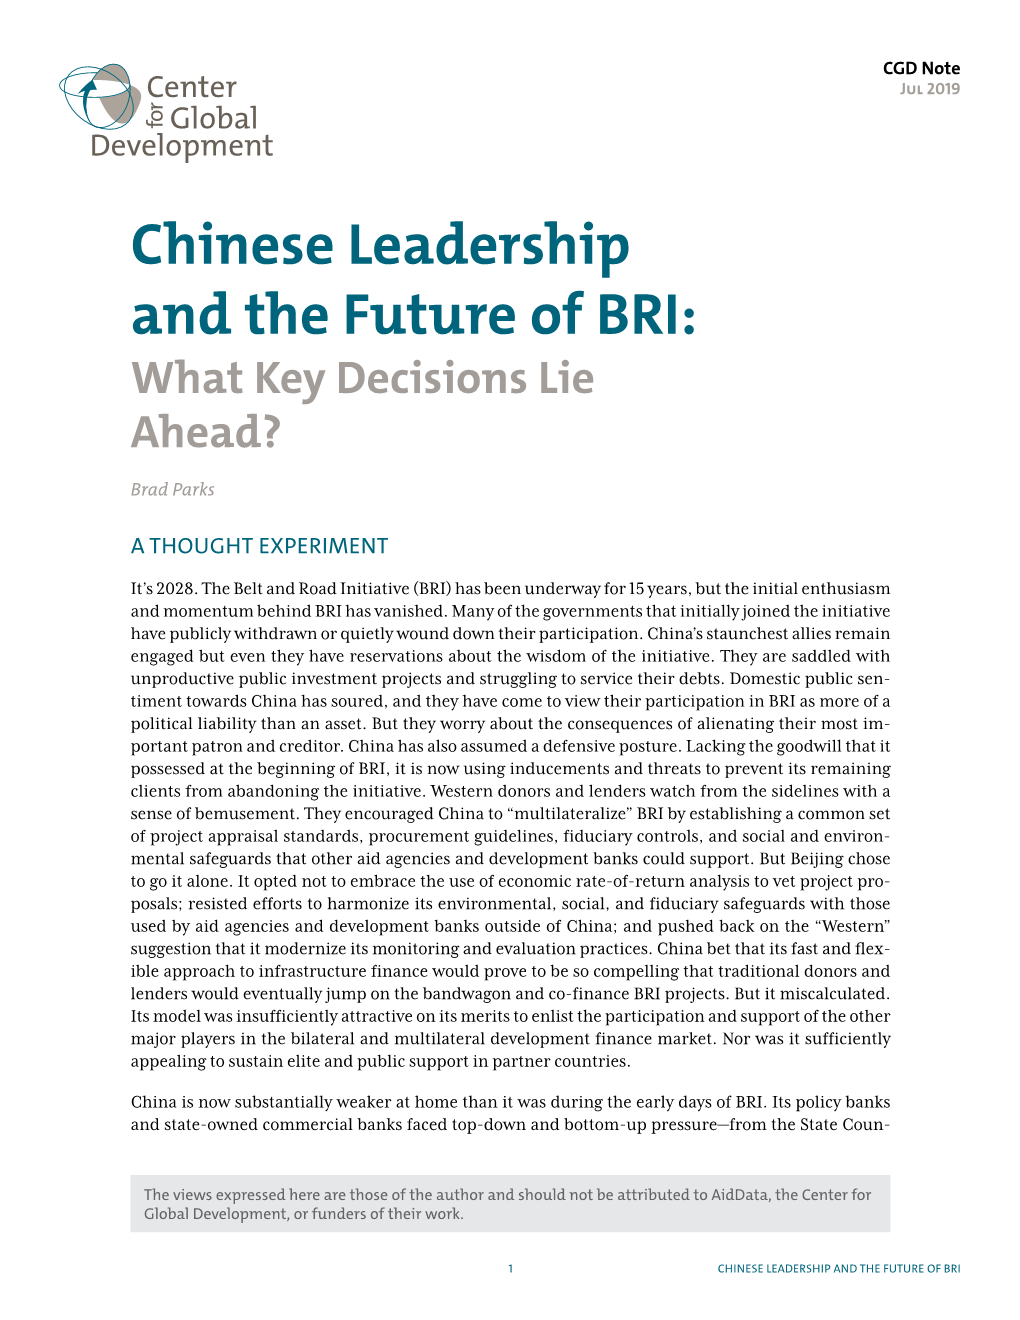 Chinese Leadership and the Future of BRI: What Key Decisions Lie Ahead?